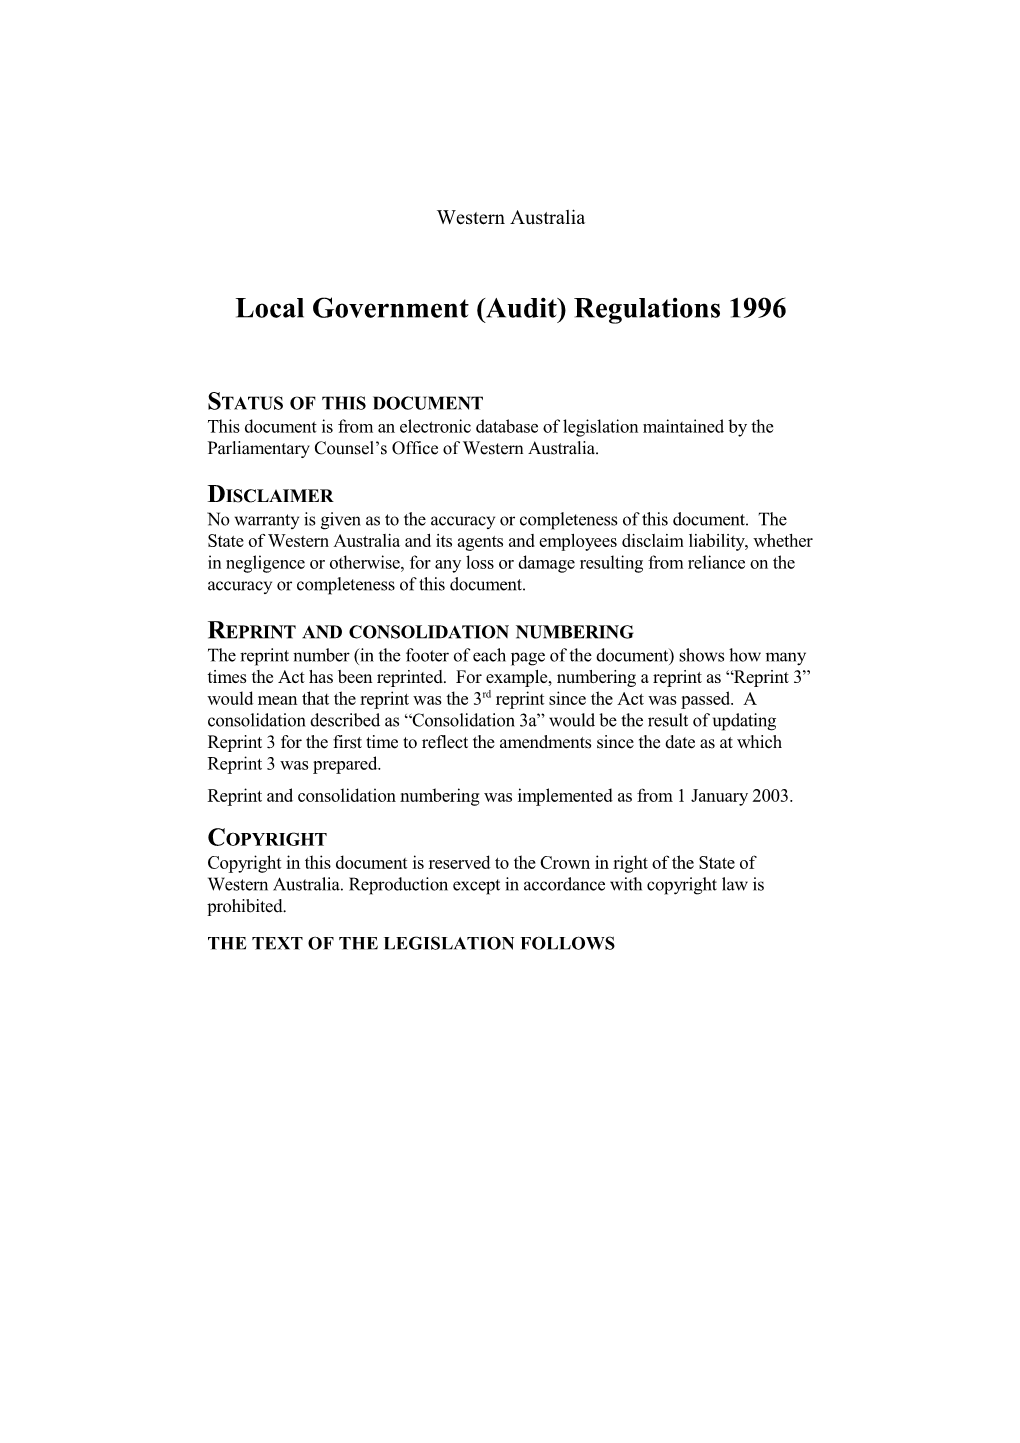 Local Government (Audit) Regulations 1996